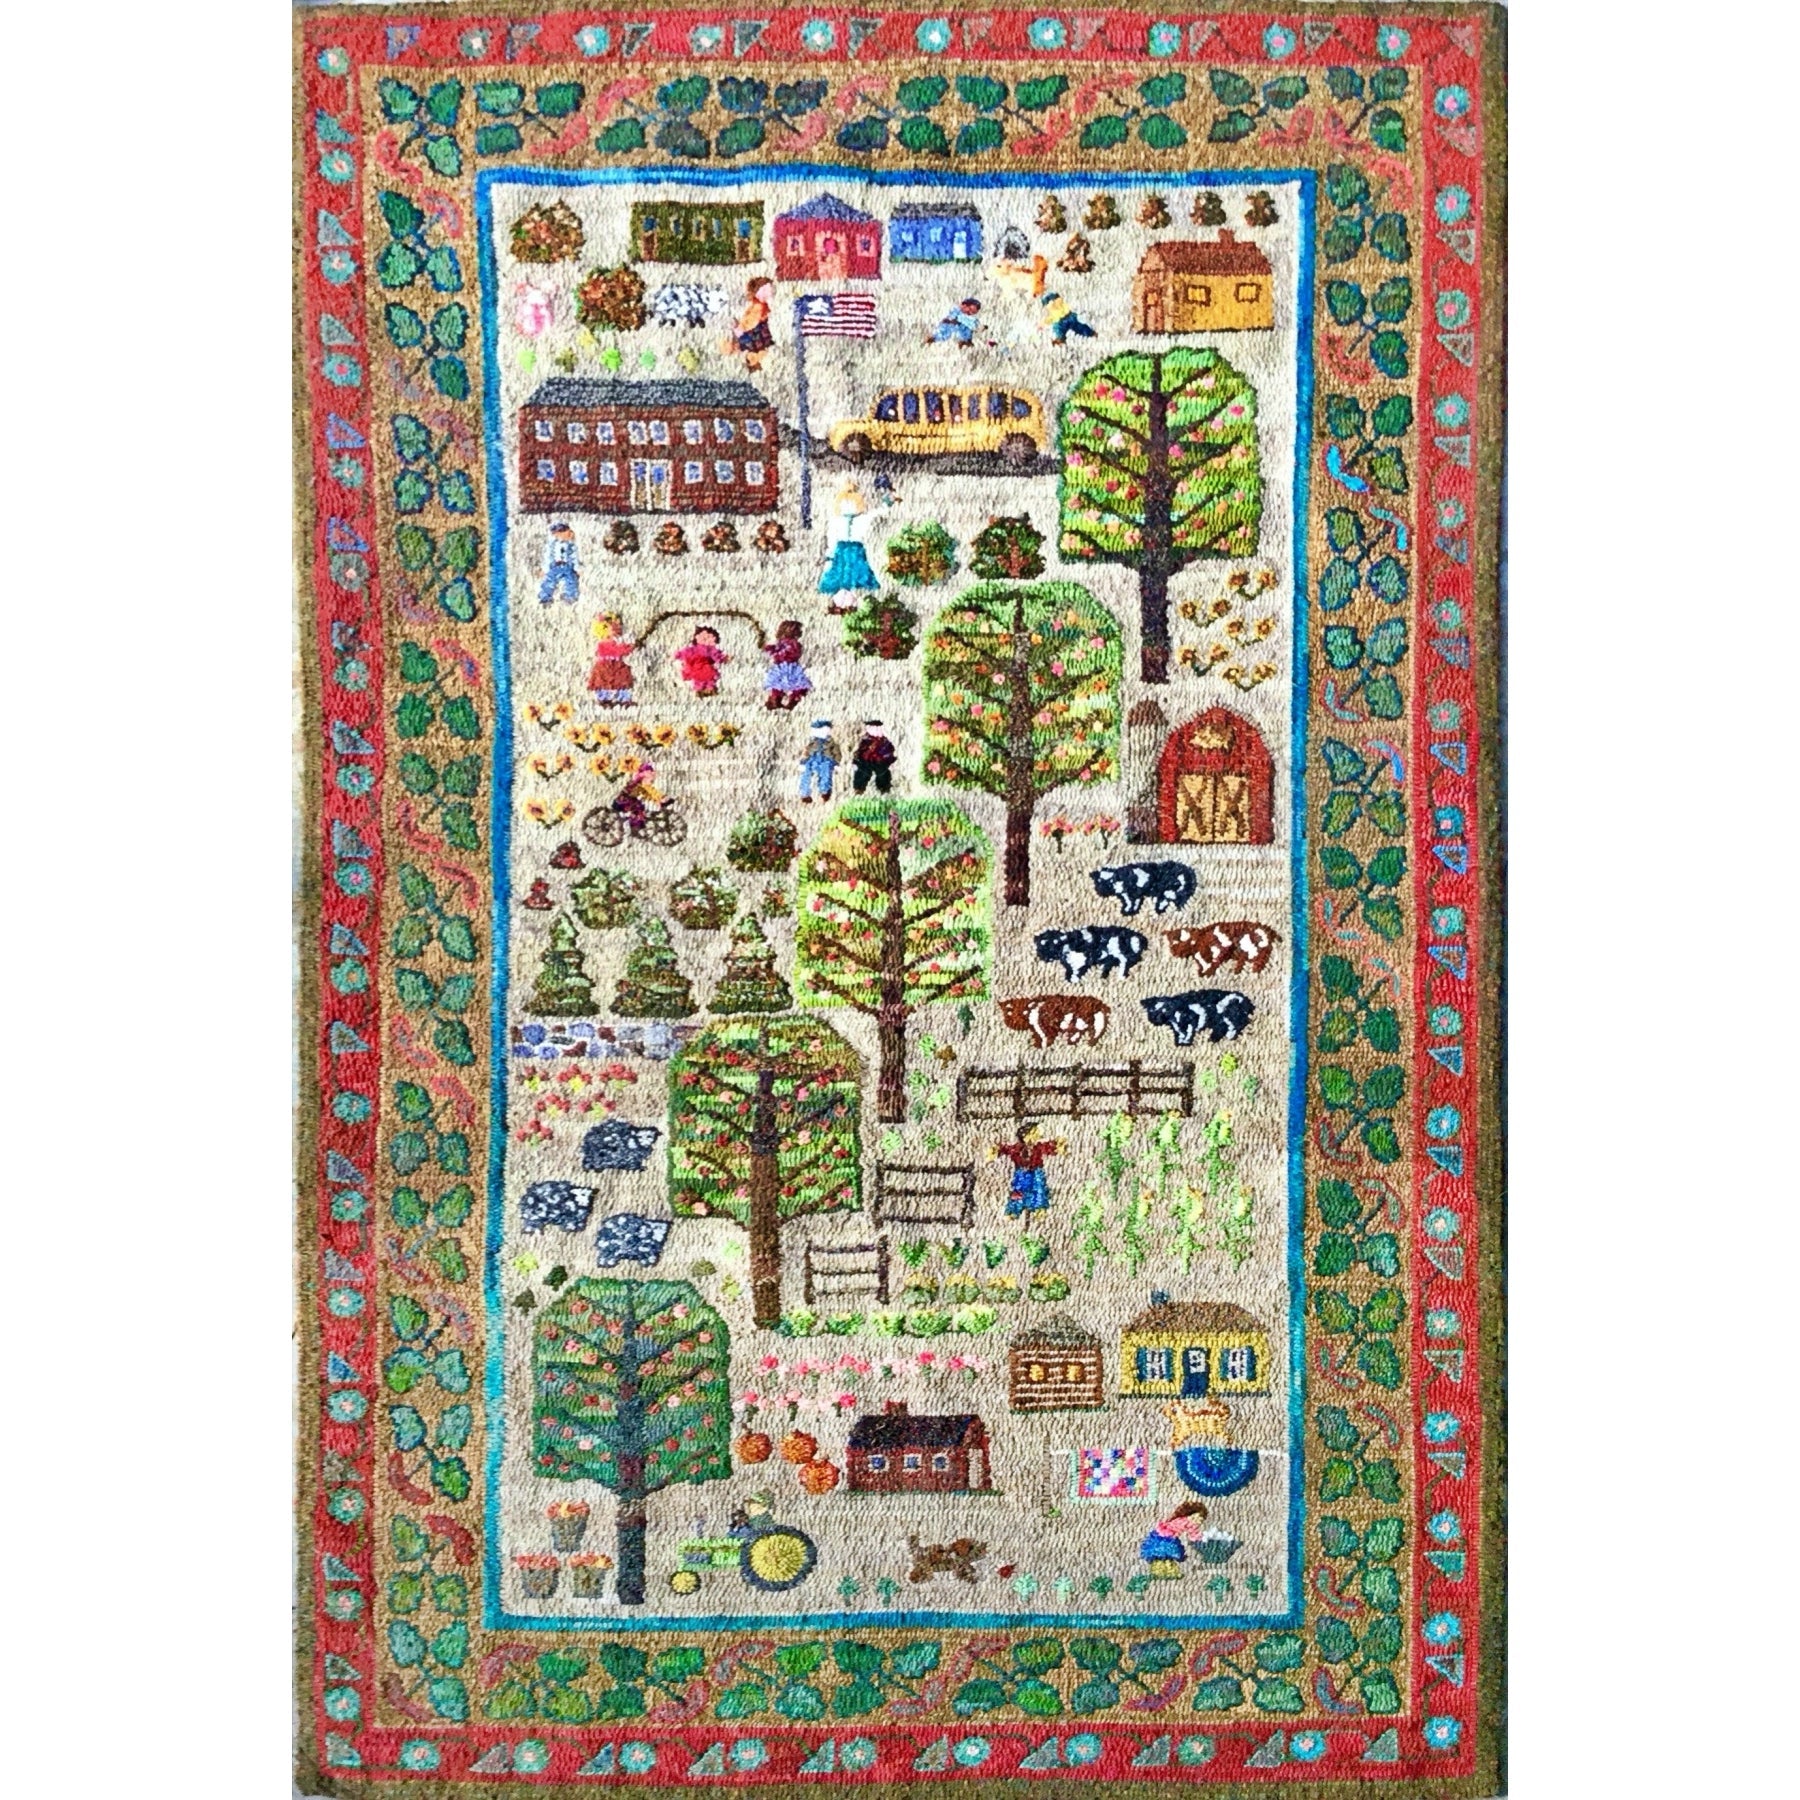 East Meets West, rug hooked by Pat Sims